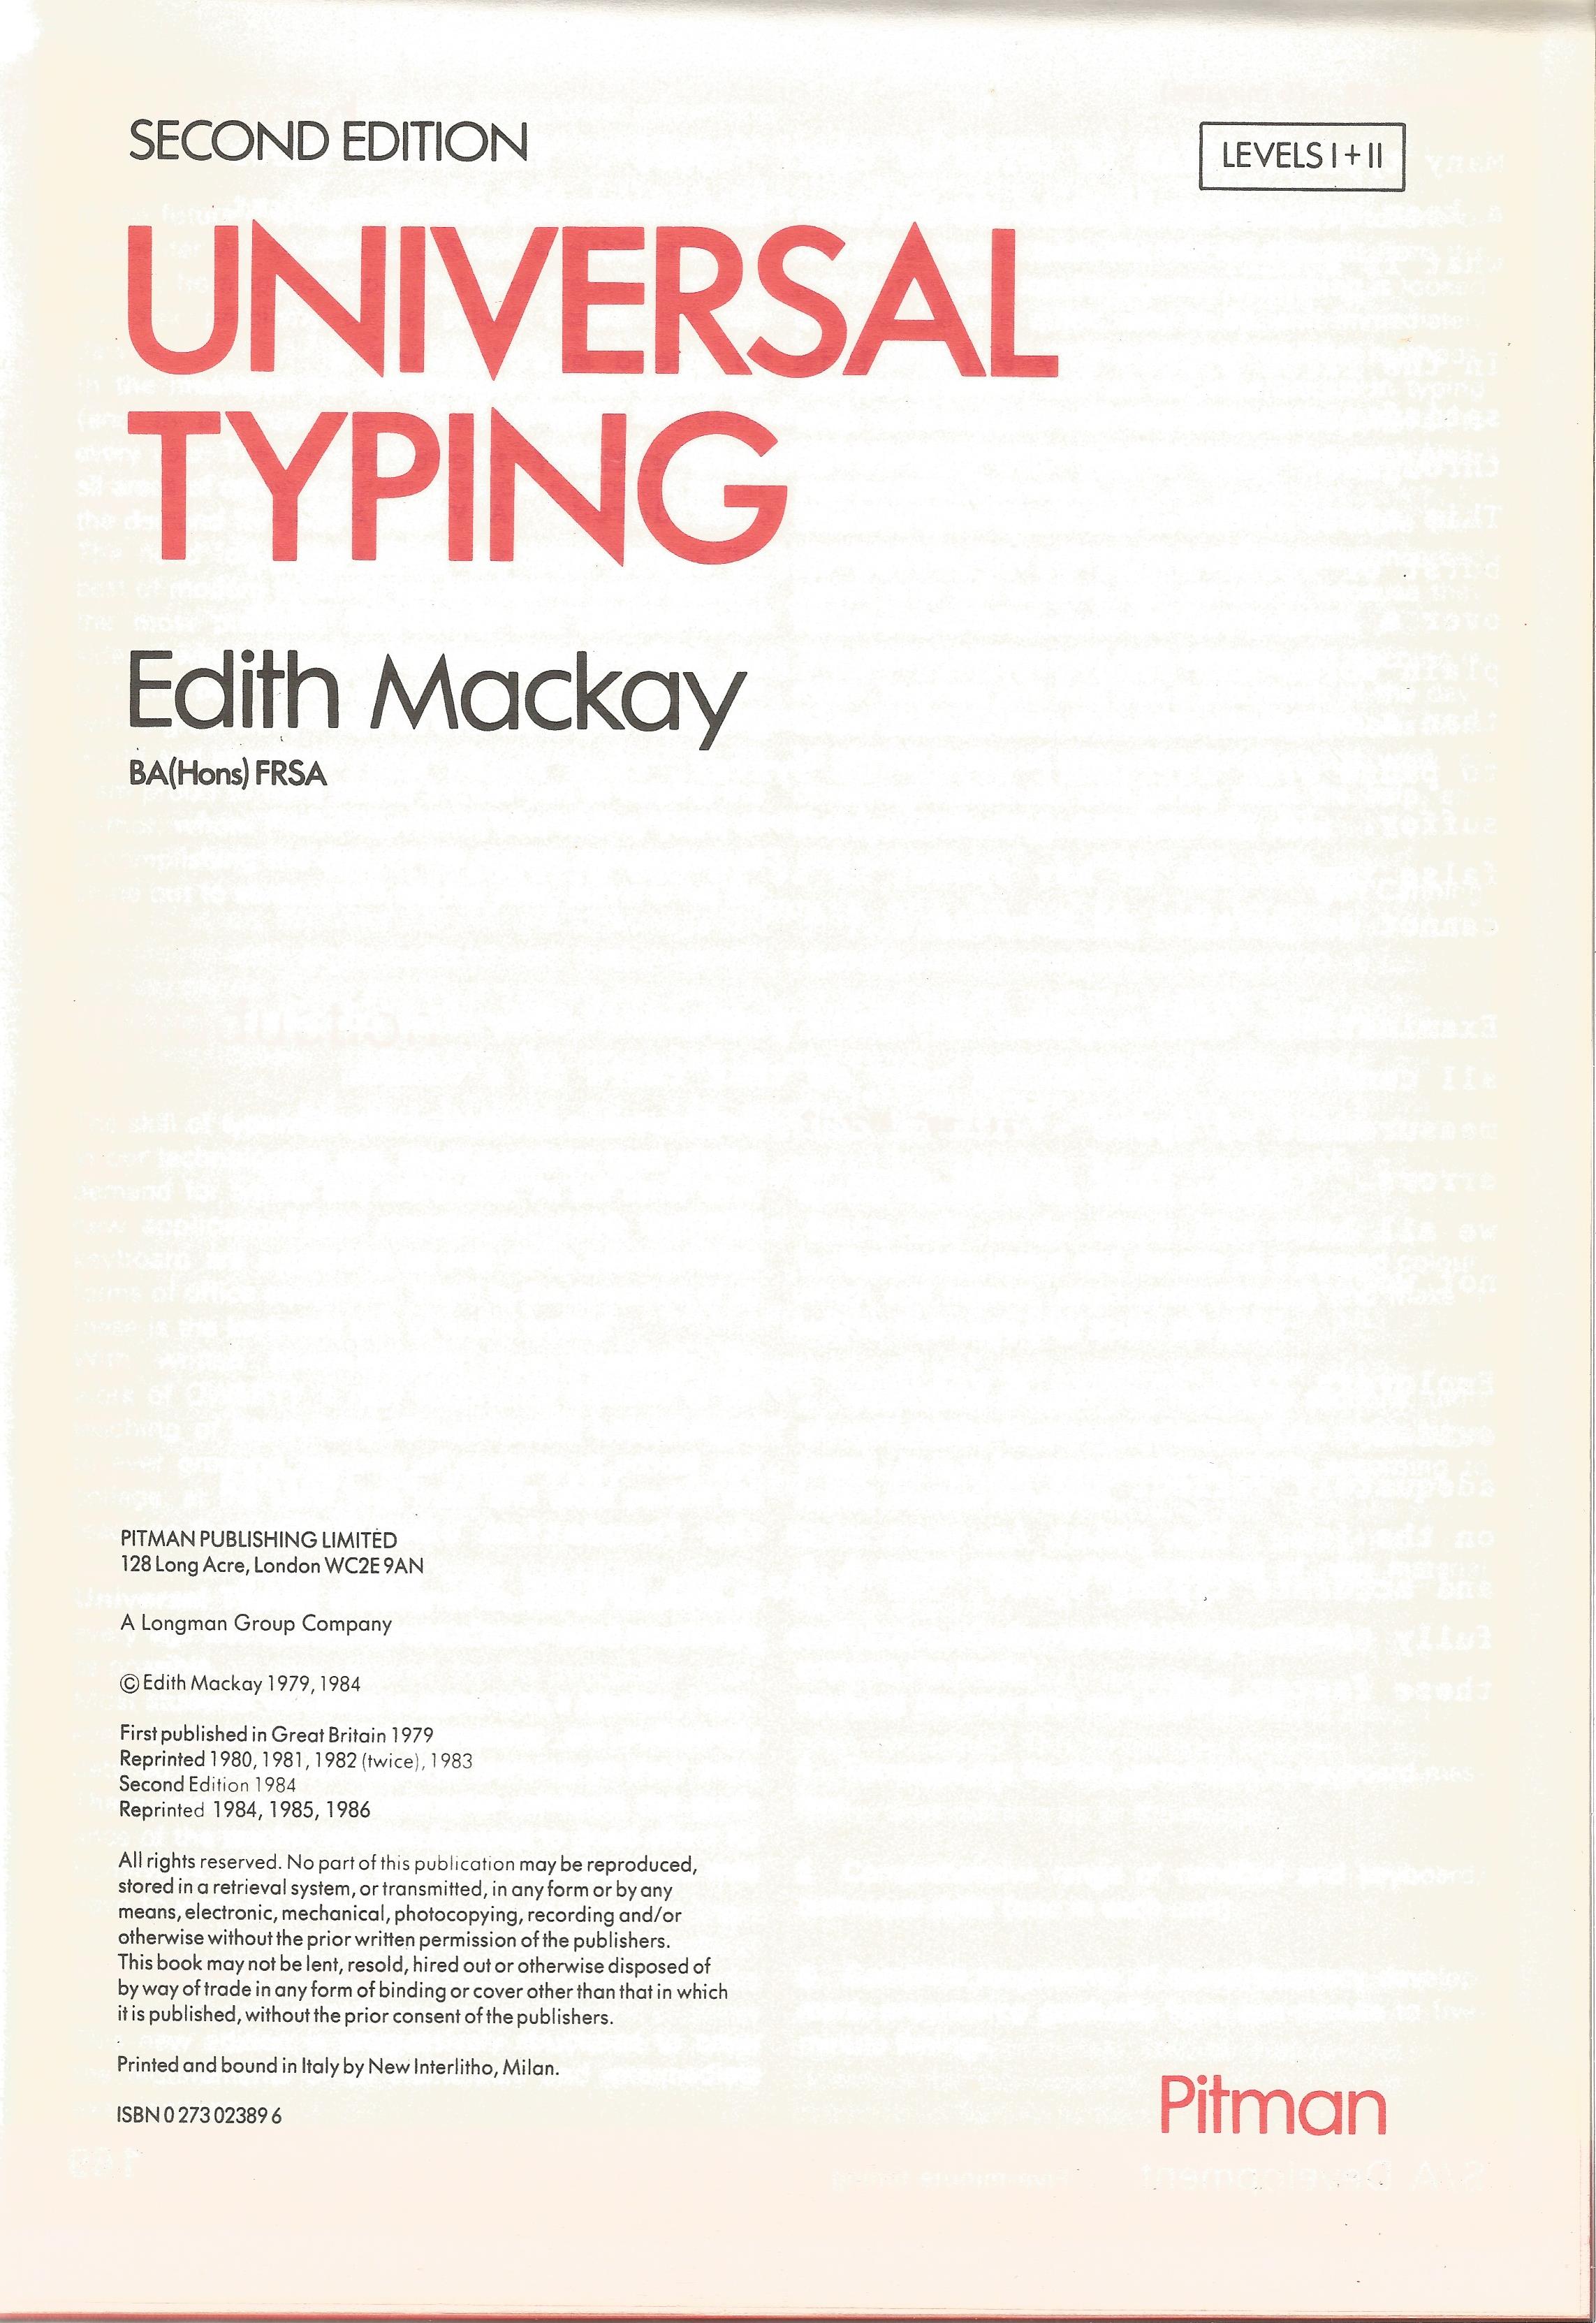 Universal Typing by Edith Mackay Second Edition Hardback Book 1986 published by Pitman Publishing - Image 2 of 2